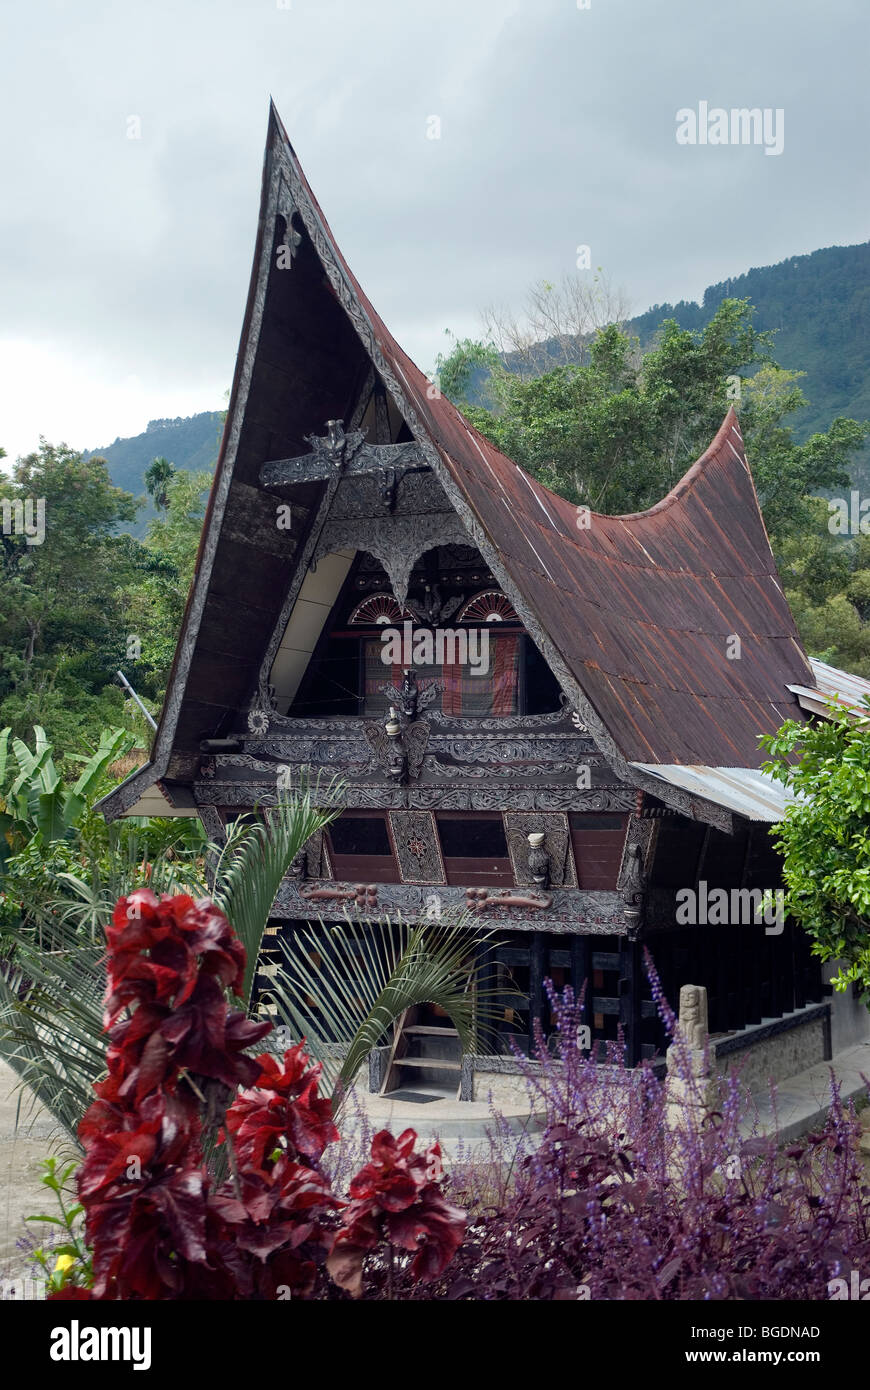 The characteristic sweeping prow-shaped roofs of Batak houses Stock Photo